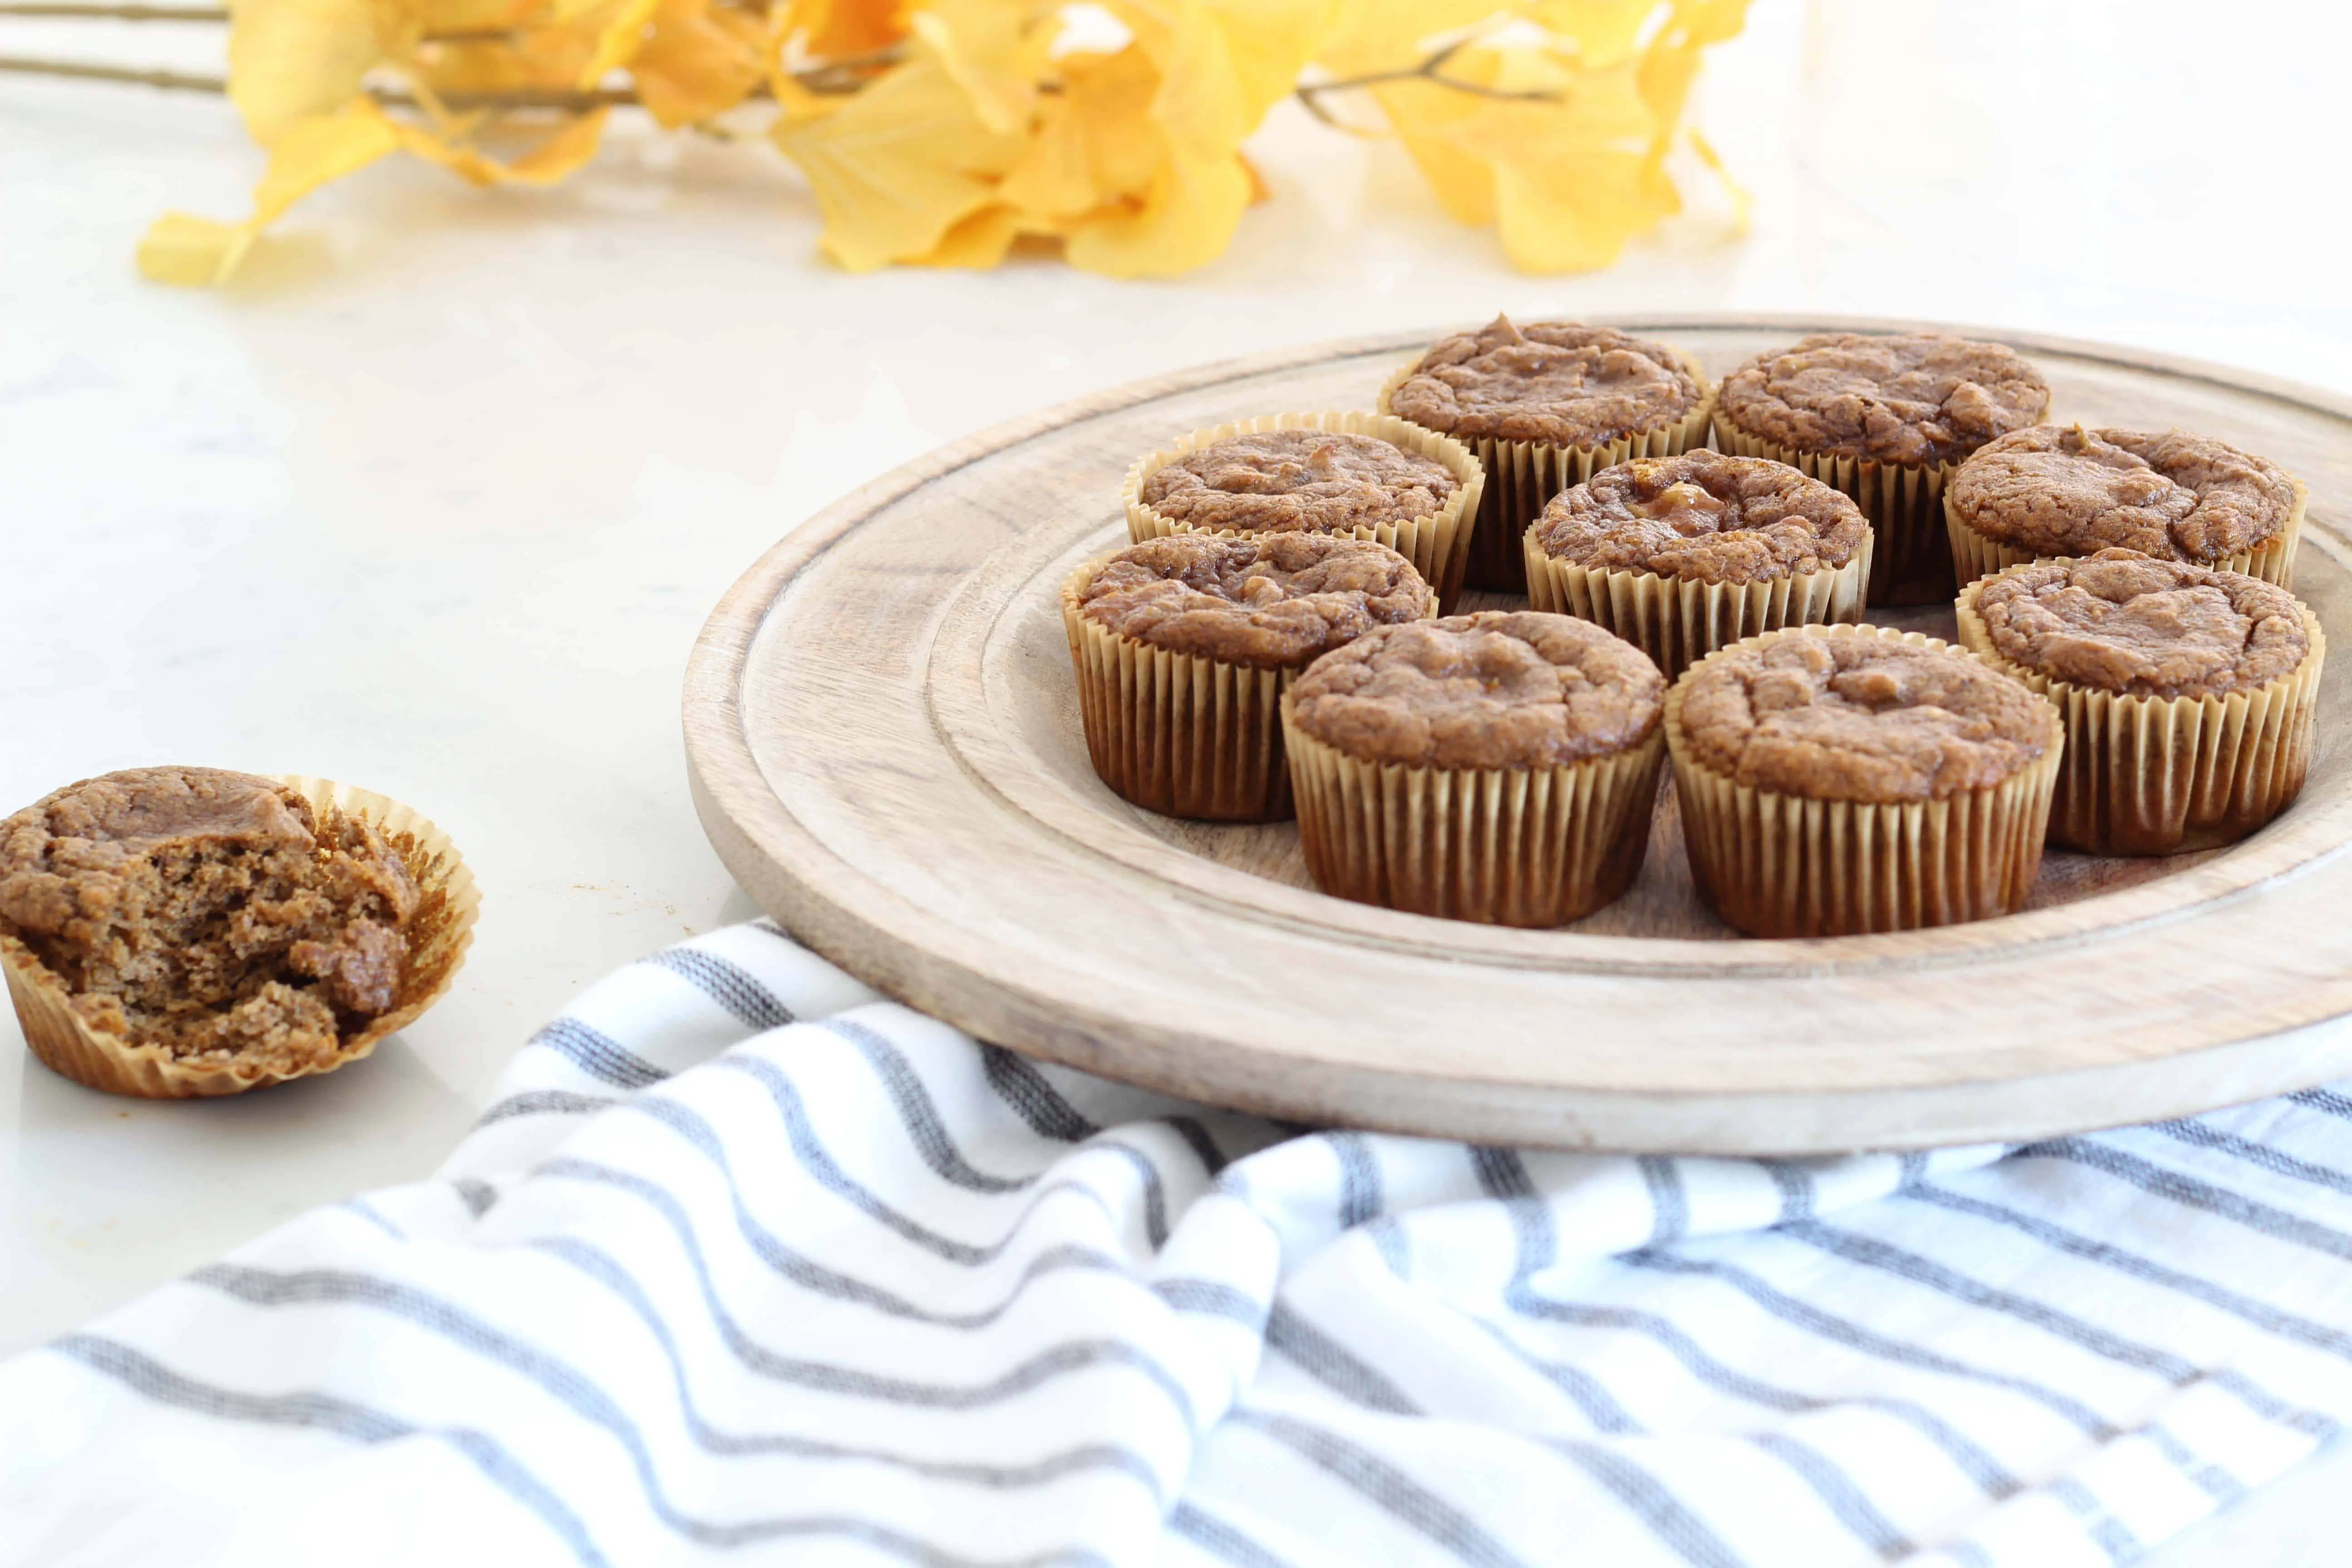 gluten free, paleo pumpkin spice muffins with gingko leaves